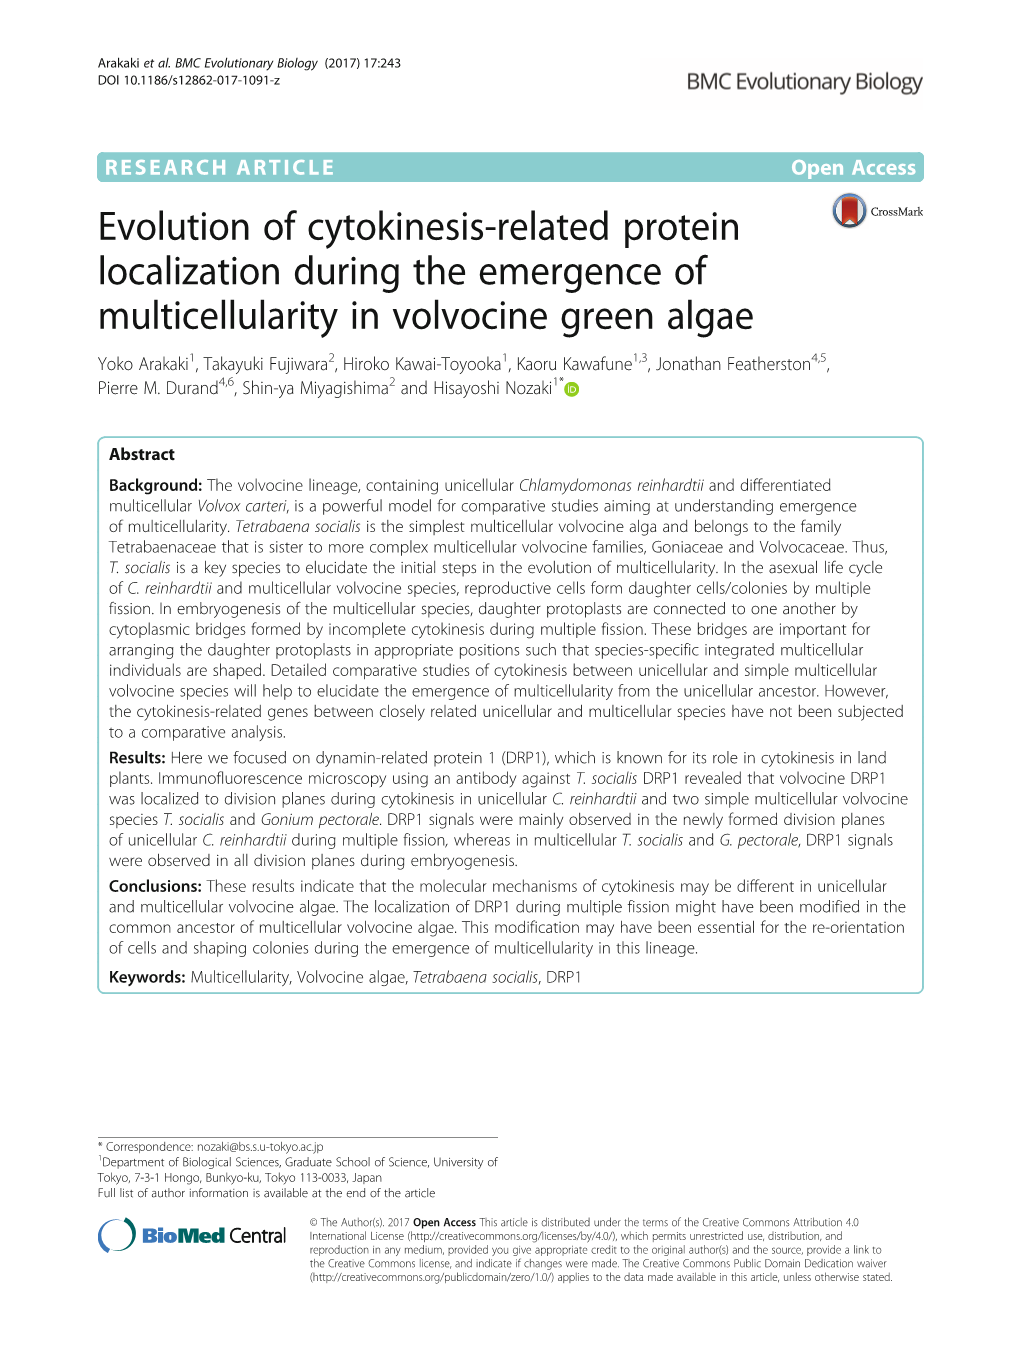 Evolution of Cytokinesis-Related Protein Localization During The